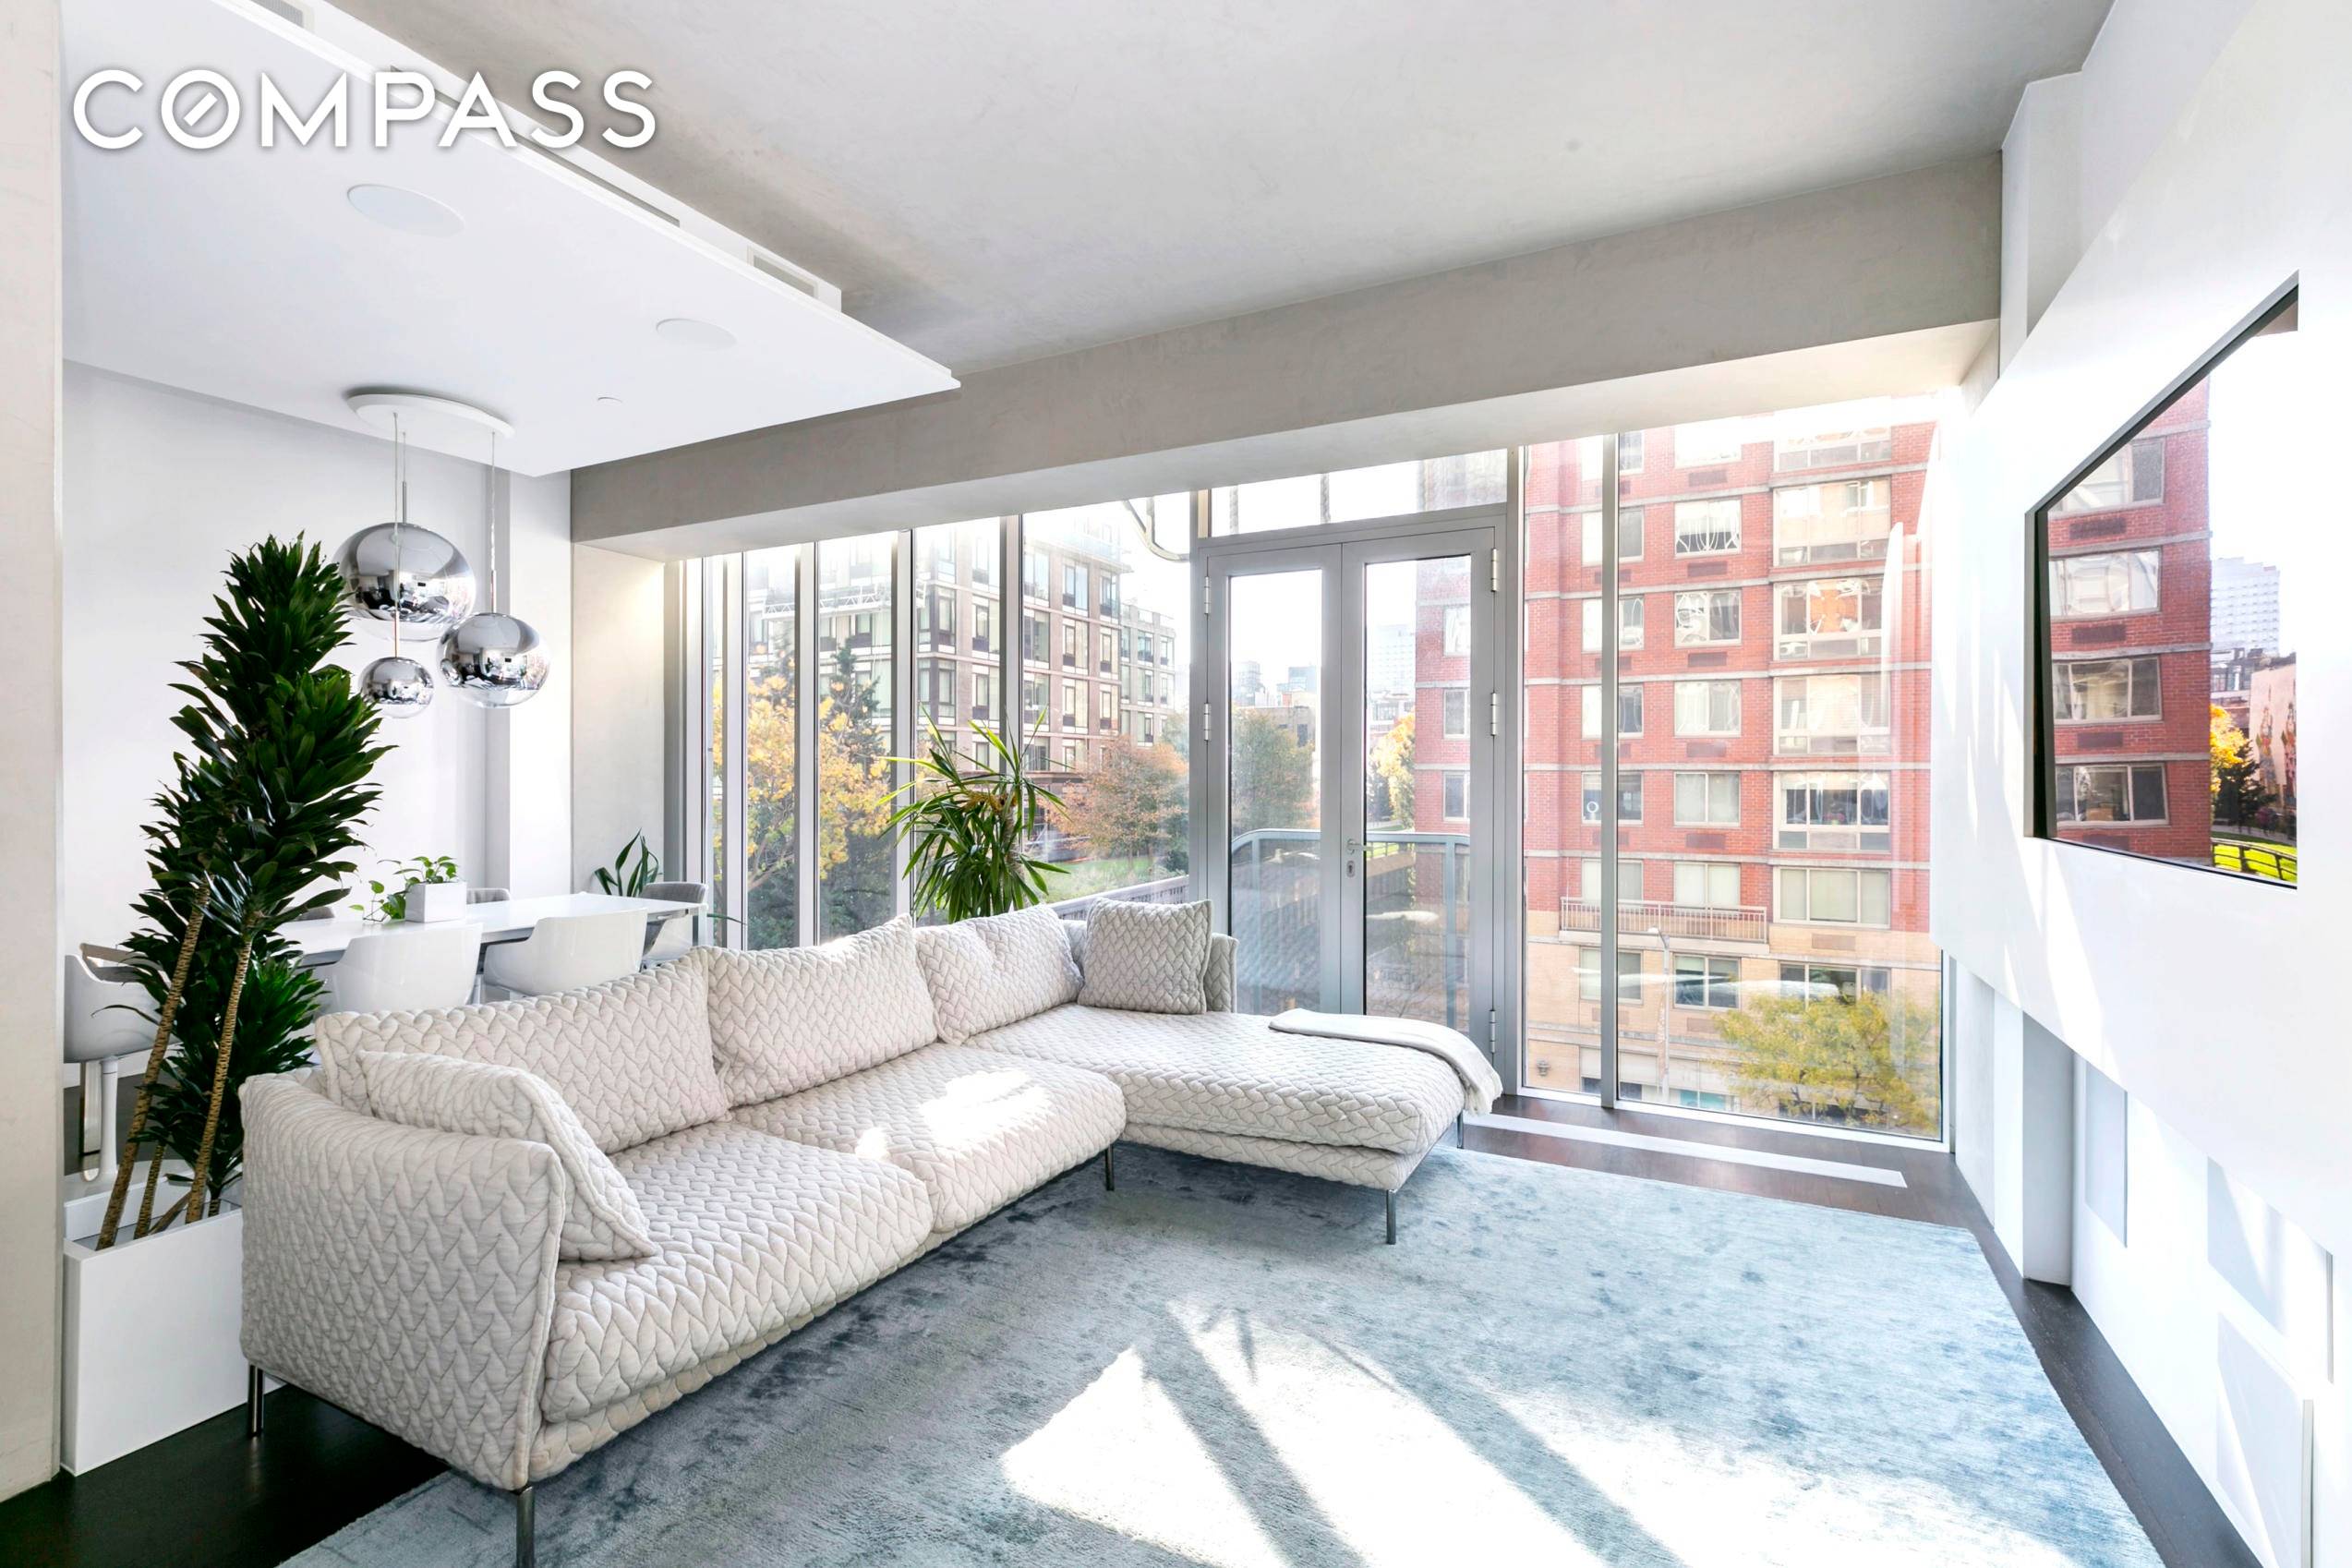 Stunning 2 bed 2 bath loft like full floor home at High Line 519 spanning almost 1700 SF with a private balcony.